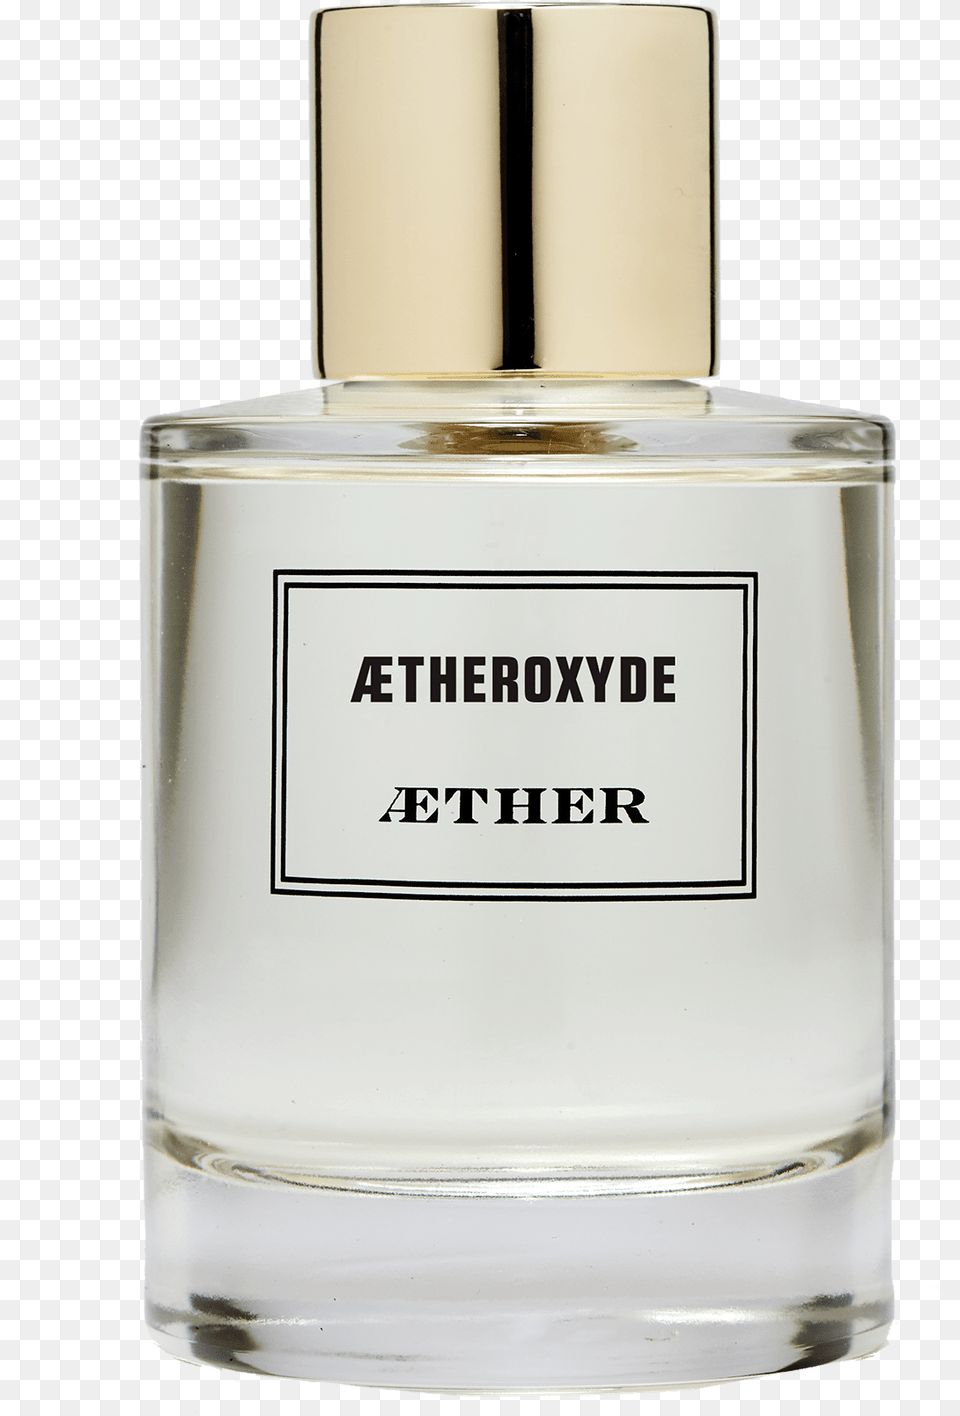 Aether Parfum, Bottle, Cosmetics, Aftershave, Perfume Png Image